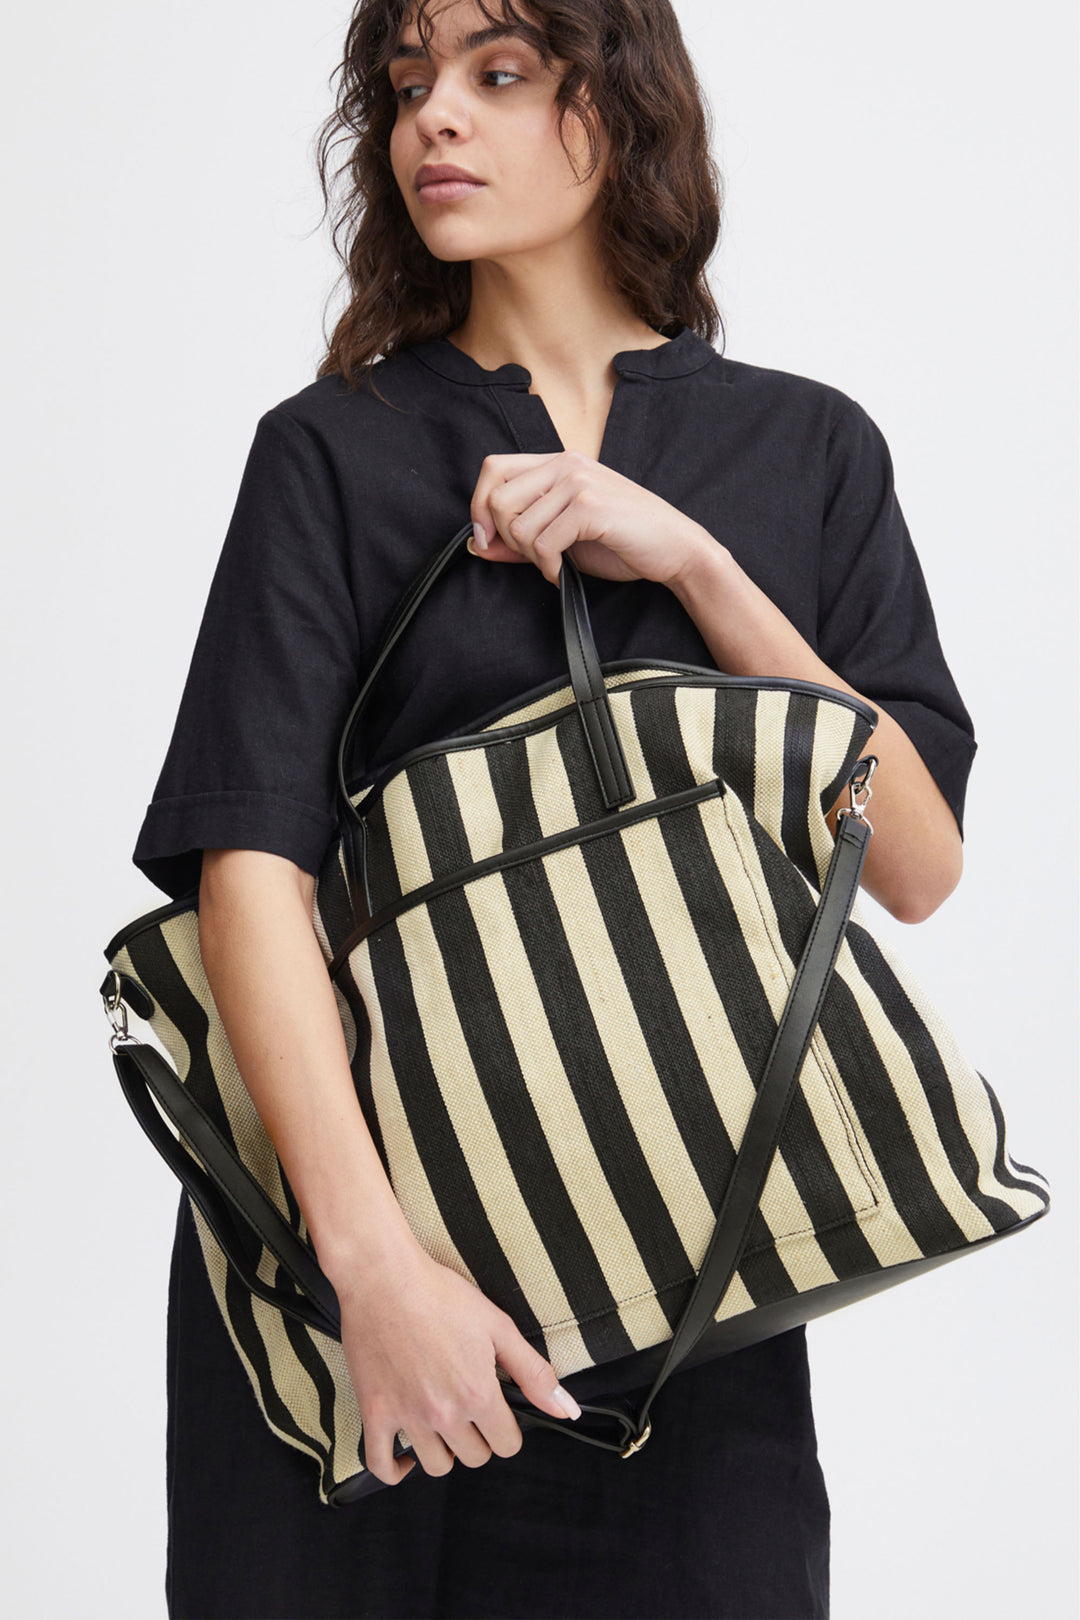 Ichi Summer 2024 With two sturdy straps, you can comfortably take on any adventure. The striking bold stripes and convenient outer pocket make this tote bag a stylish and functional choice.